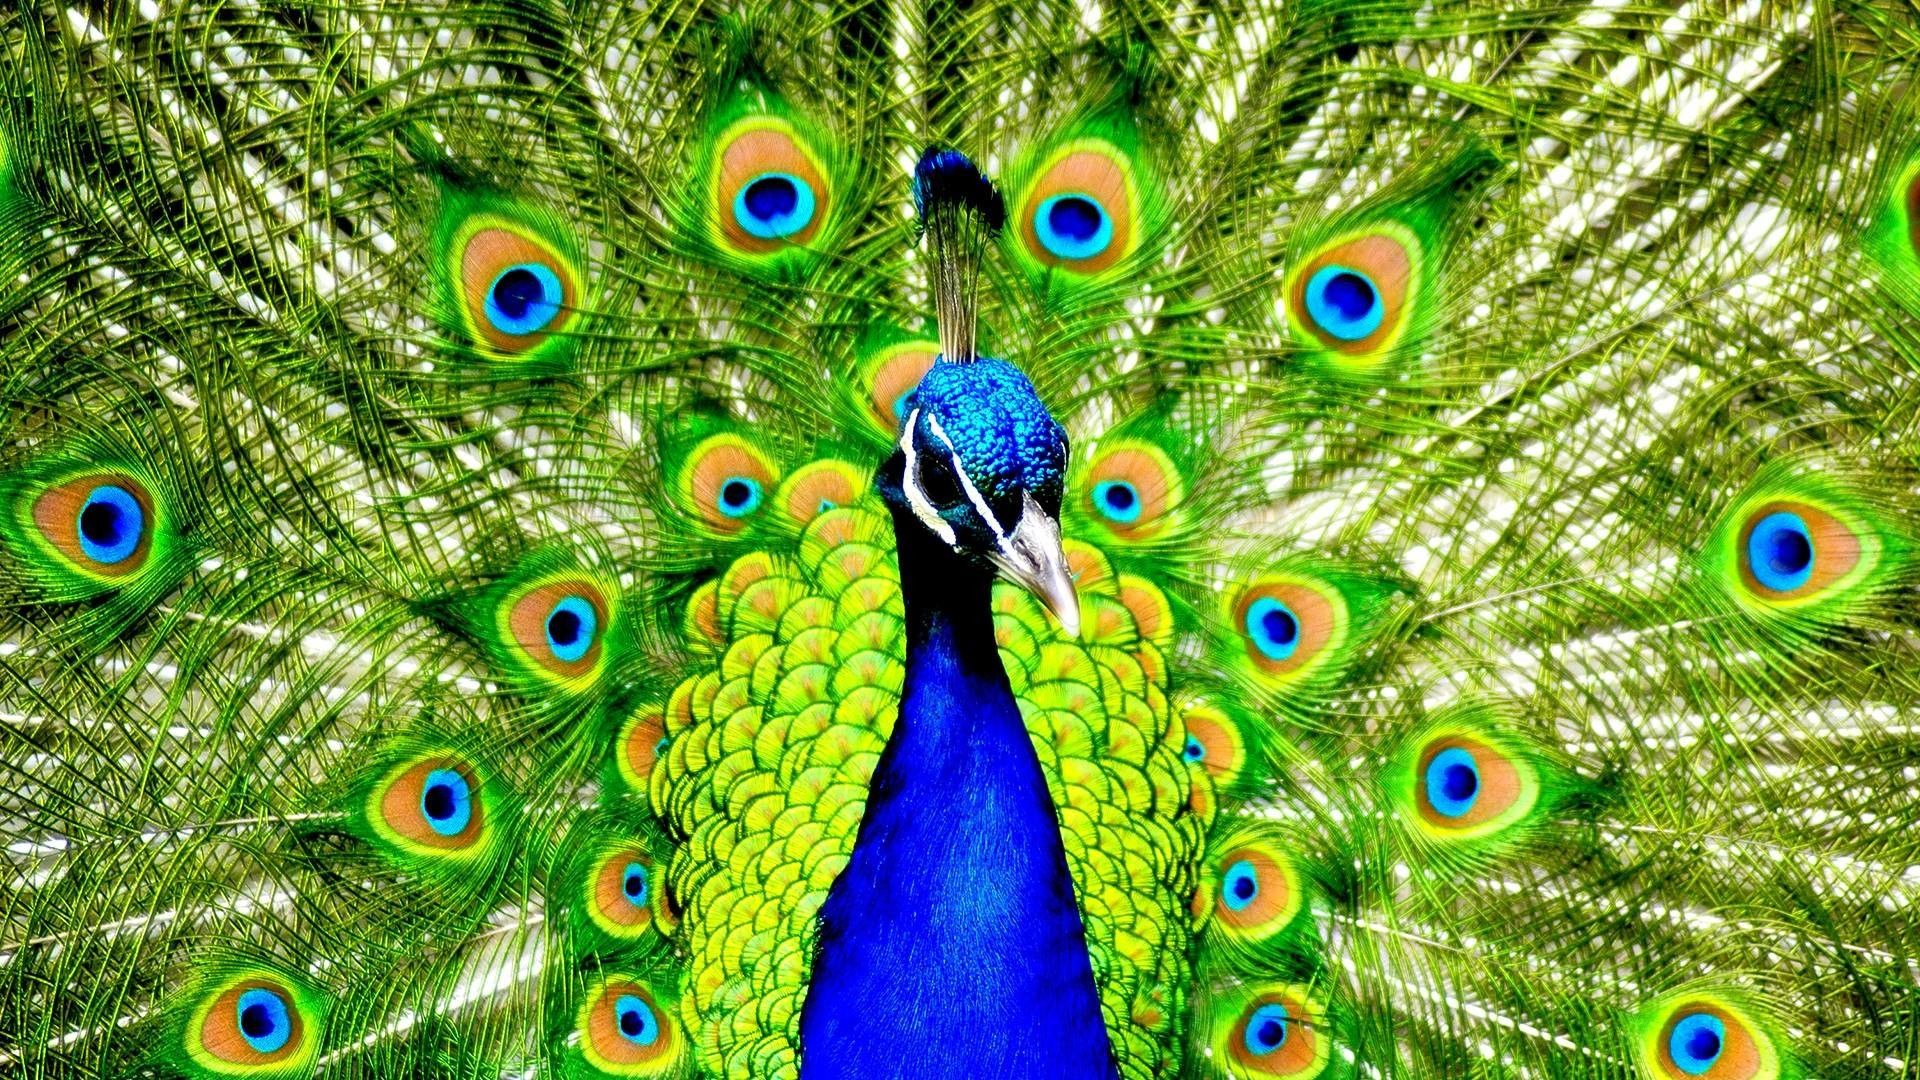 peacock images hd